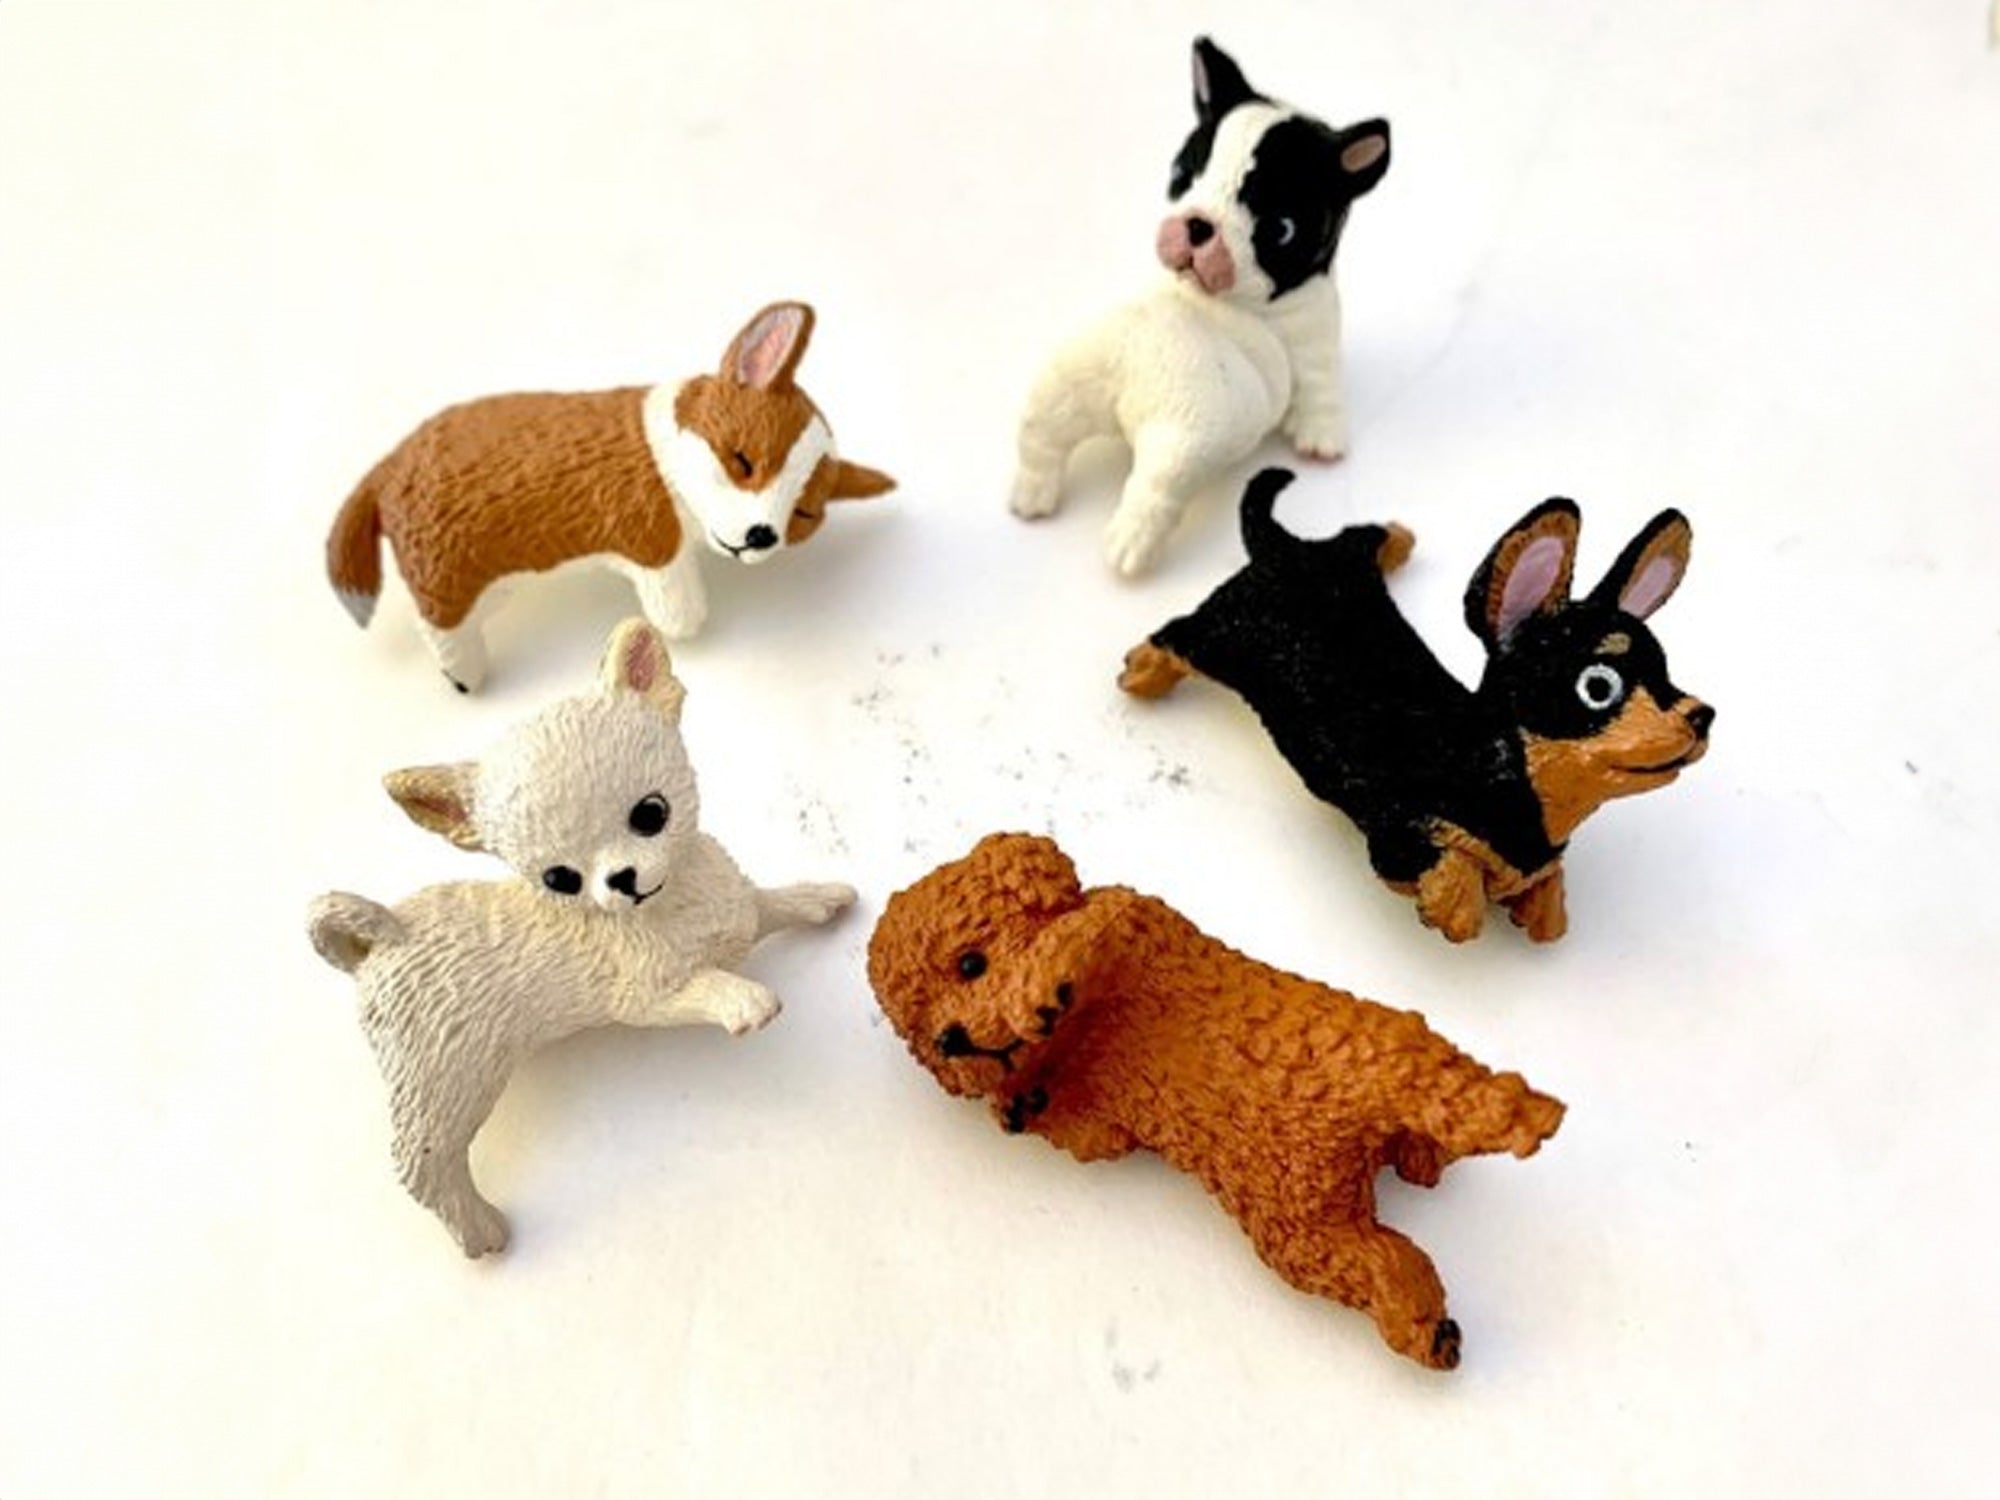 Toys Blind Dogs